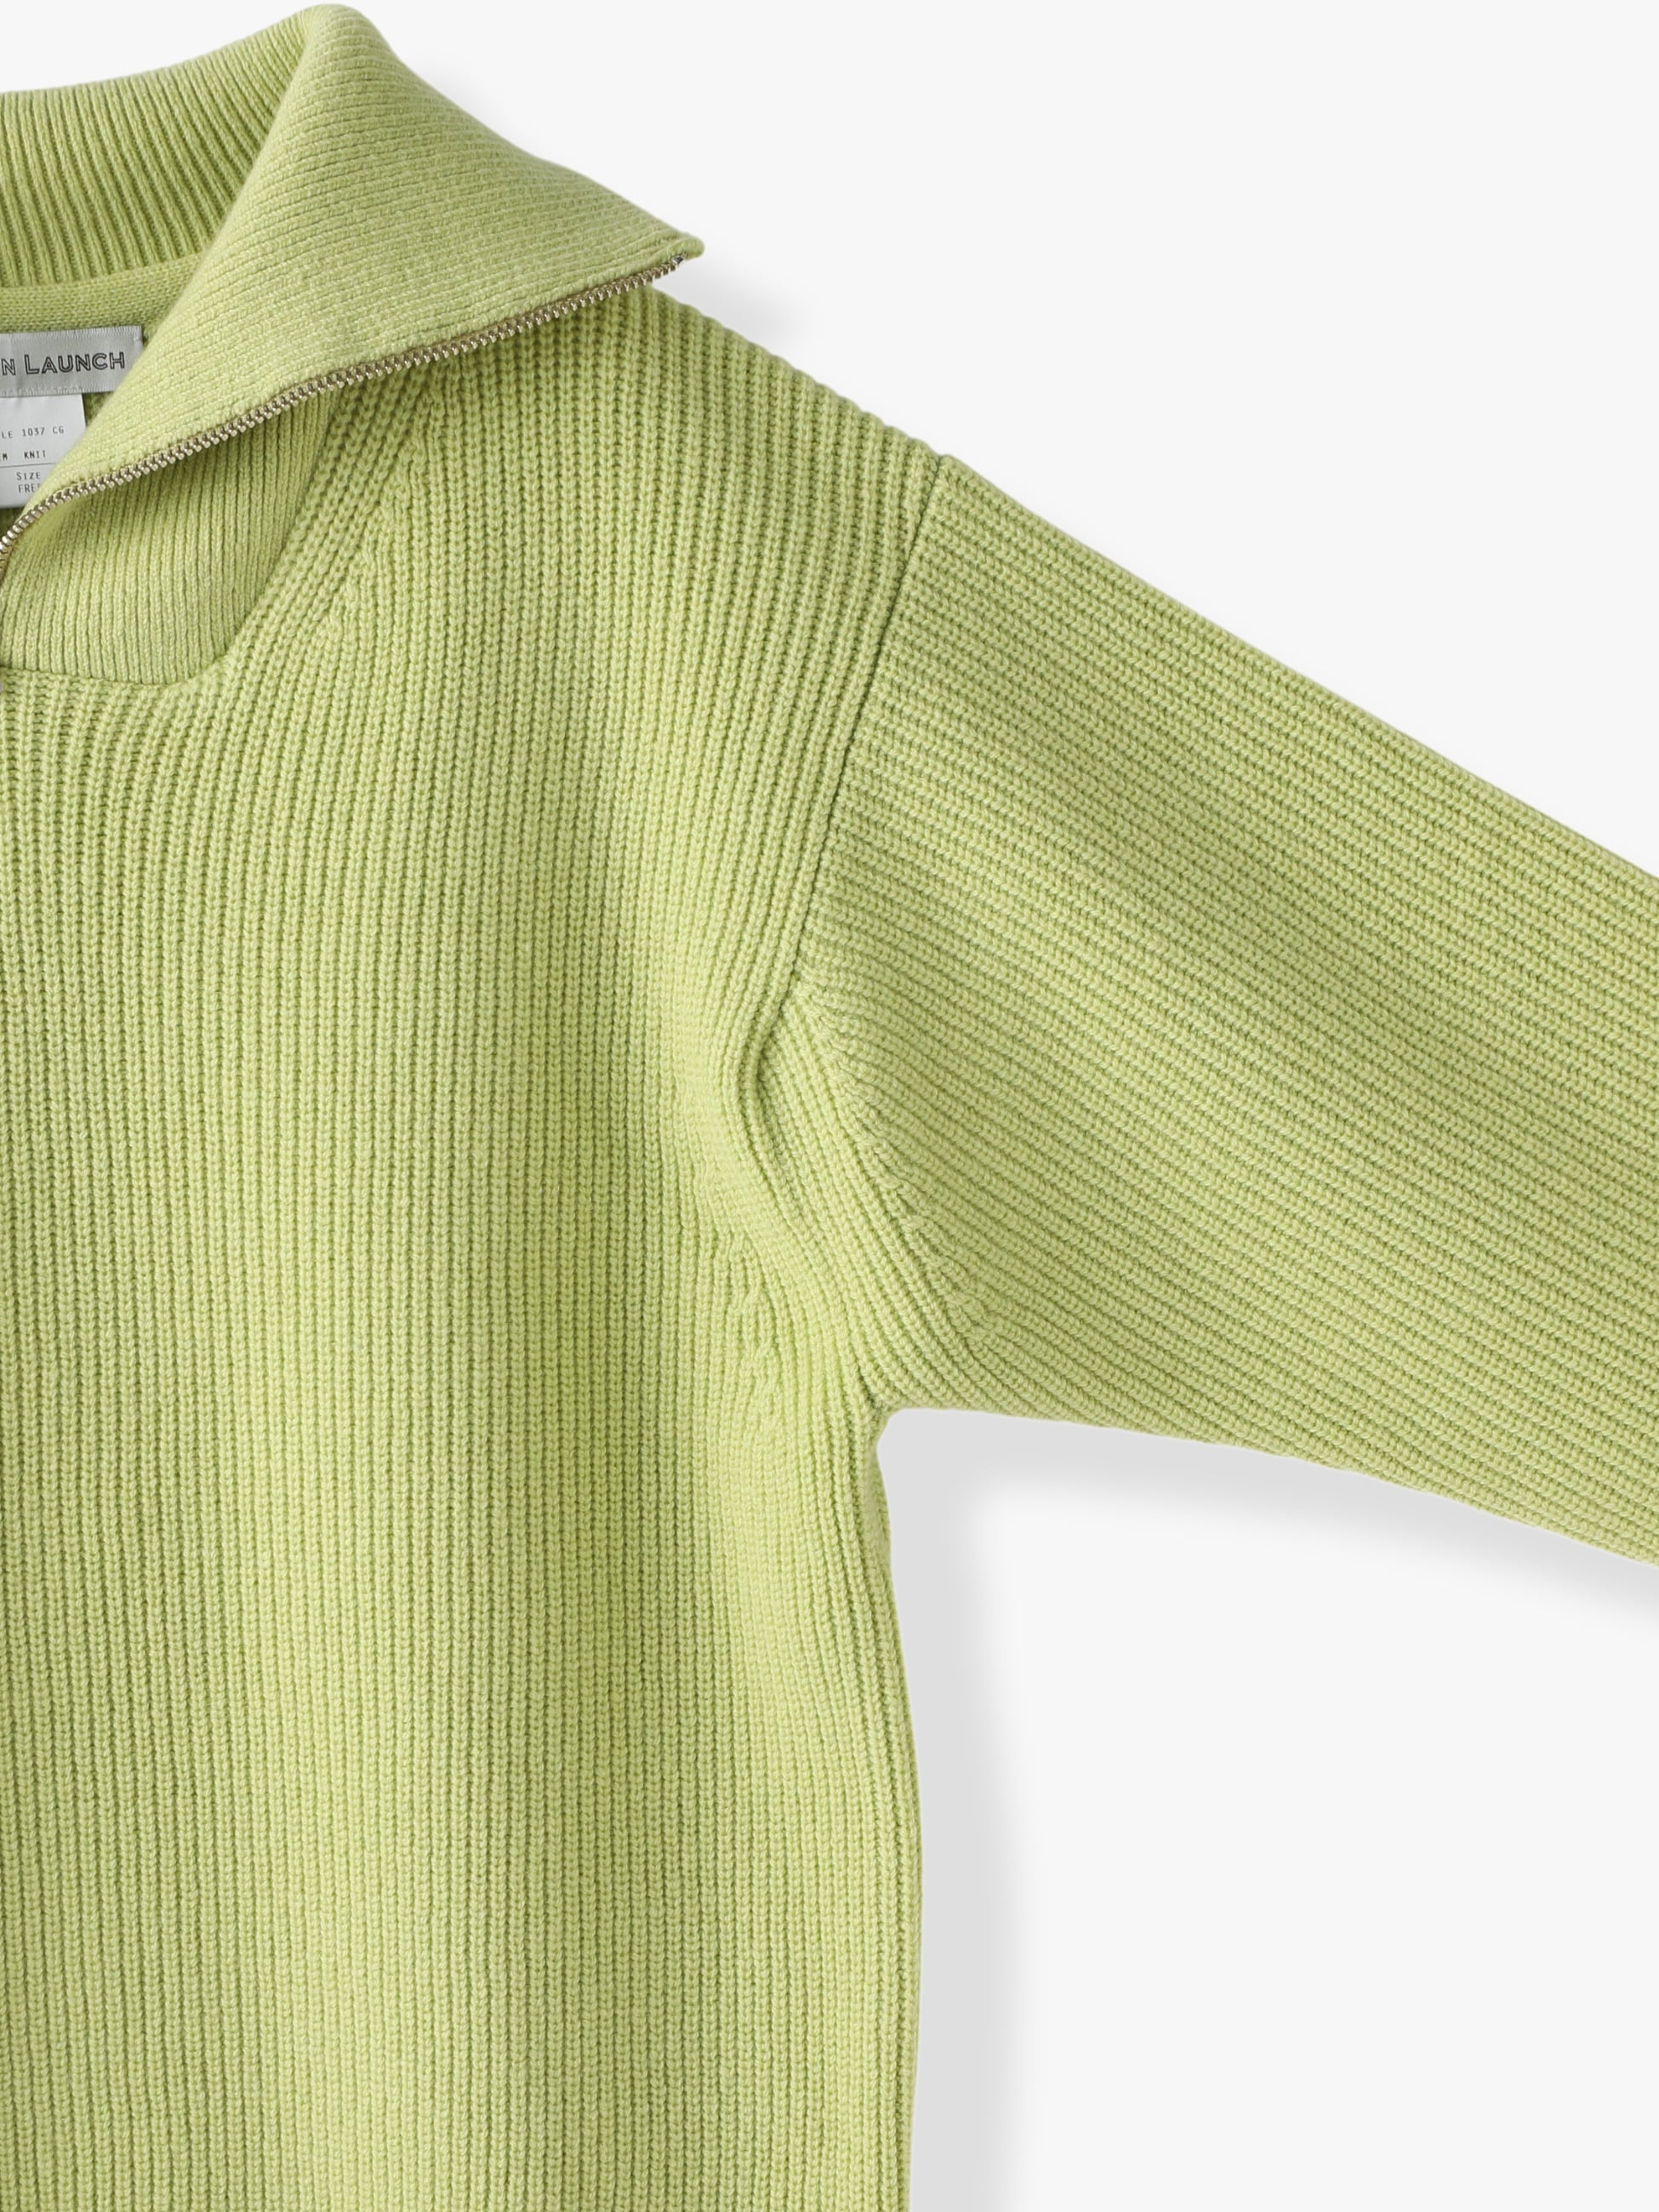 Half Zip Knit Pullover (red / light green)｜UNION LAUNCH(ユニオン